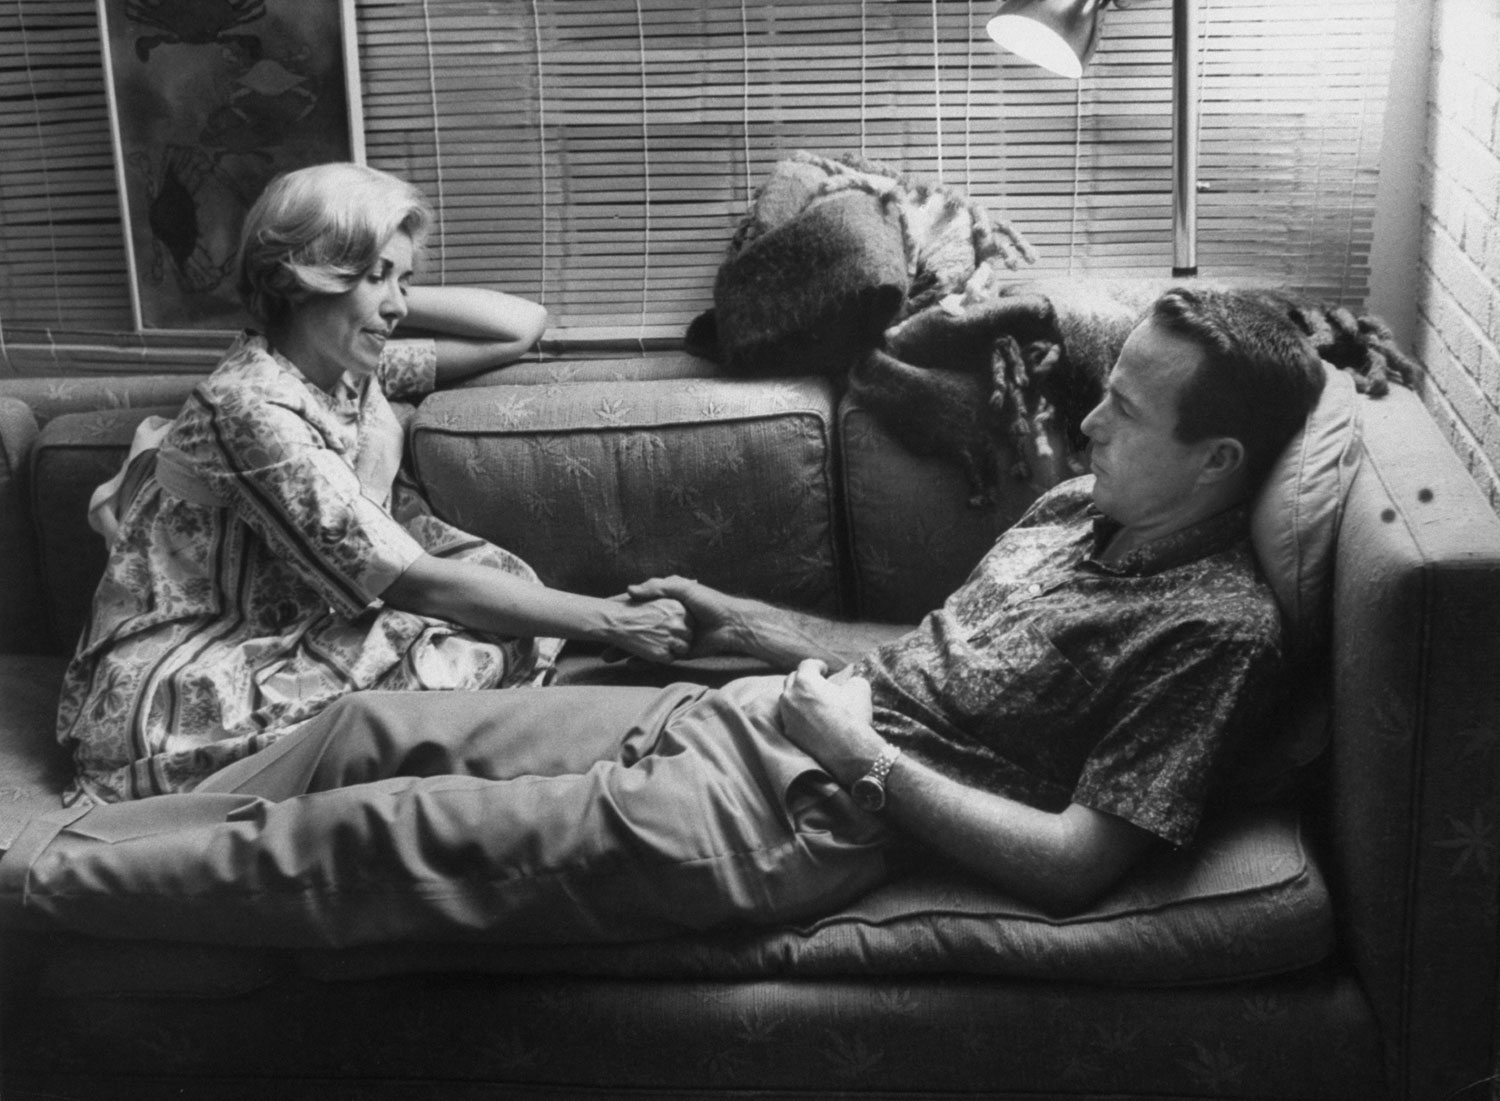 Scott Carpenter and his wife Rene talk late at night, Florida, 1962.